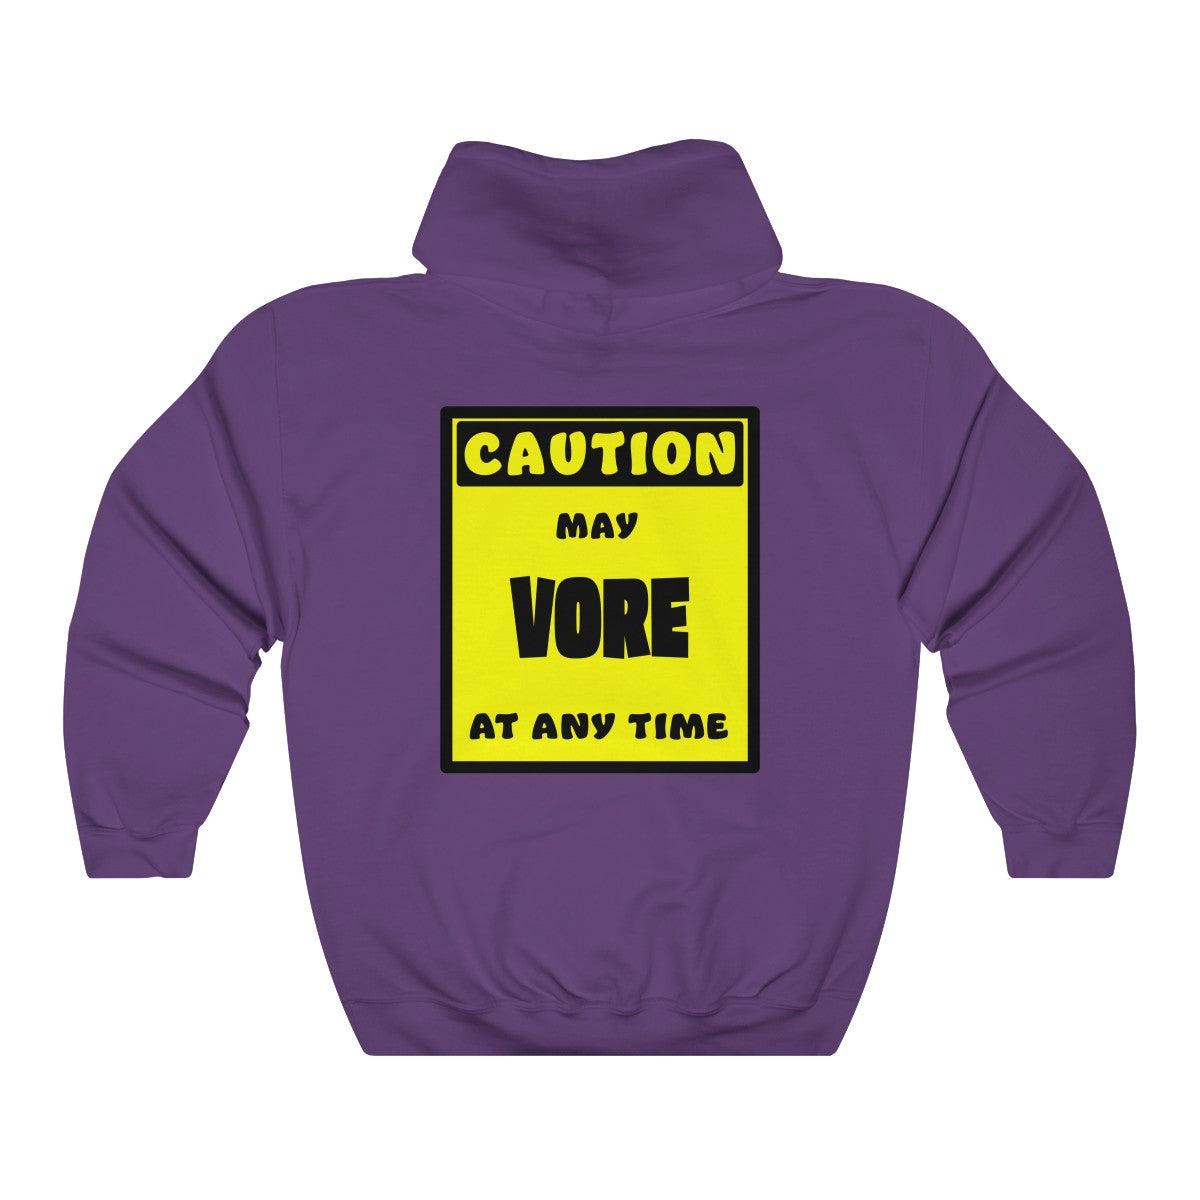 CAUTION! May VORE at any time! - Hoodie Hoodie AFLT-Whootorca Purple S 